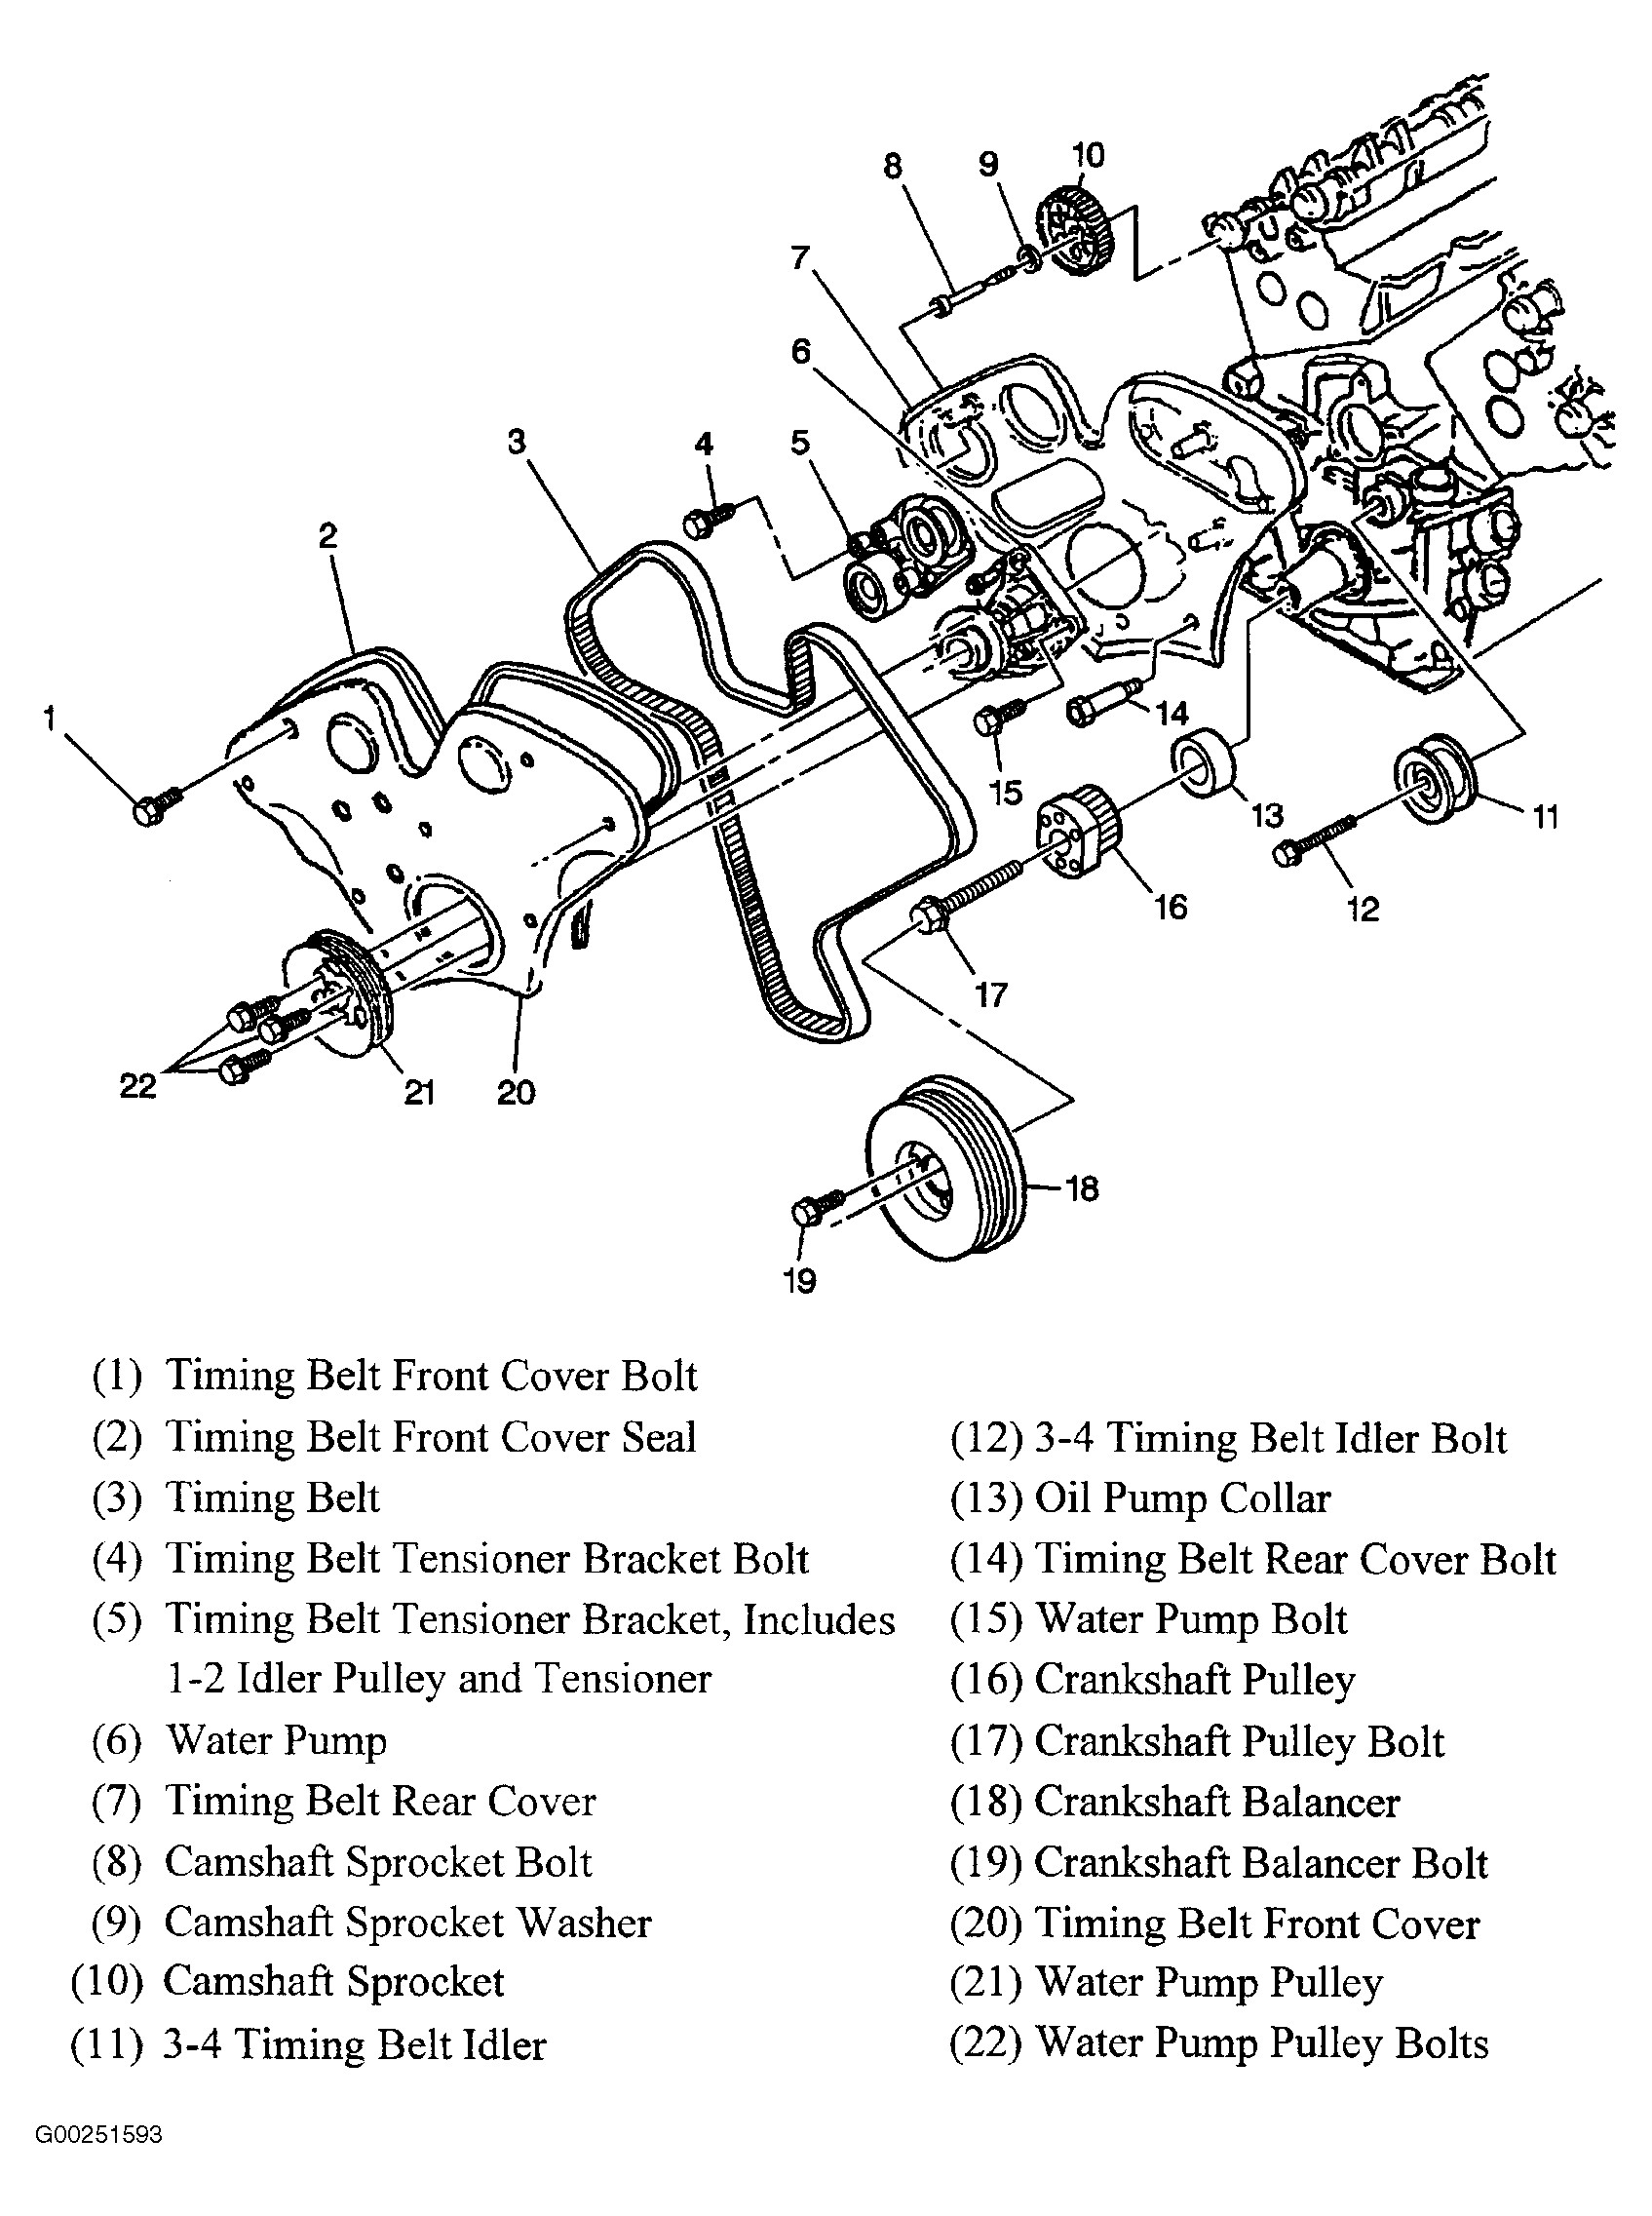 Diagram Of Engines 2003 Cadillac Cts Serpentine Belt Diagram Auto Of Diagram Of Engines